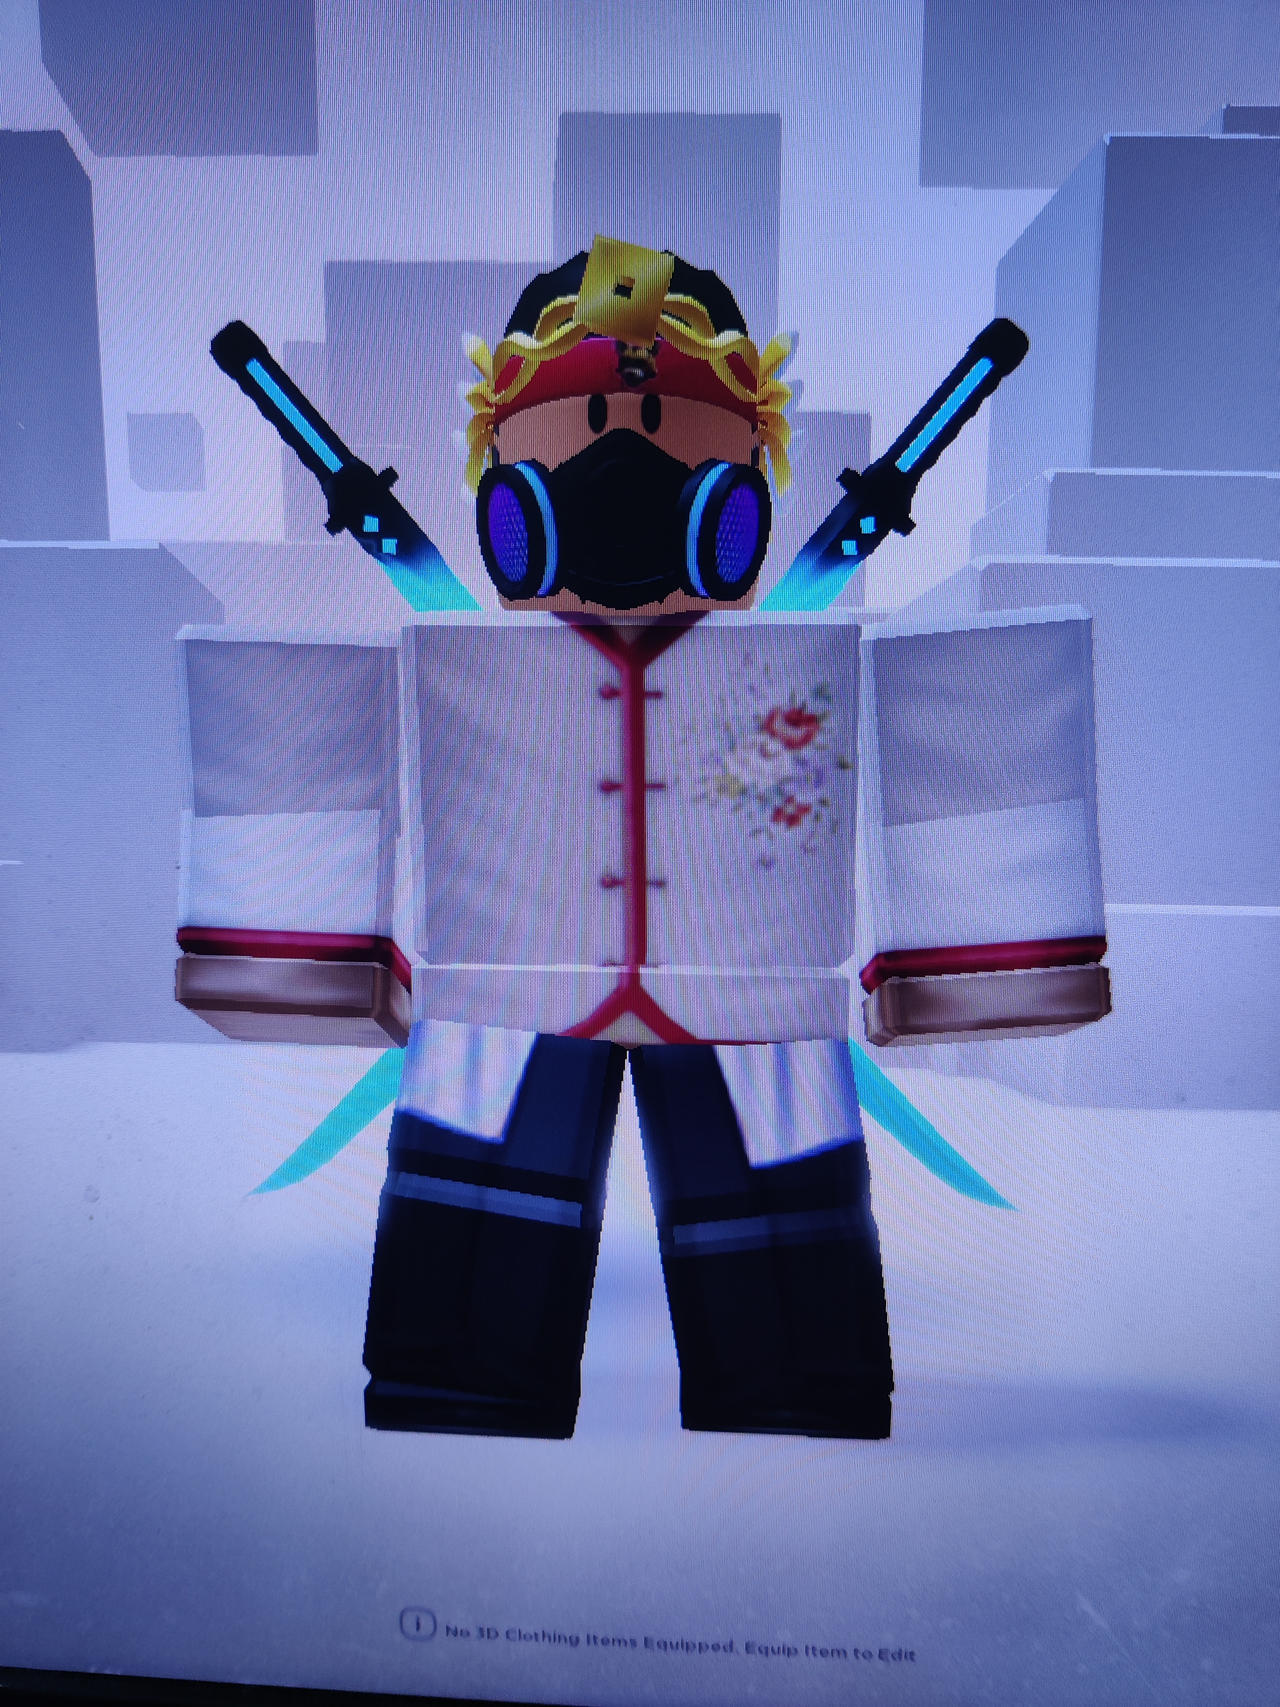 Rate My Avatar - Roblox